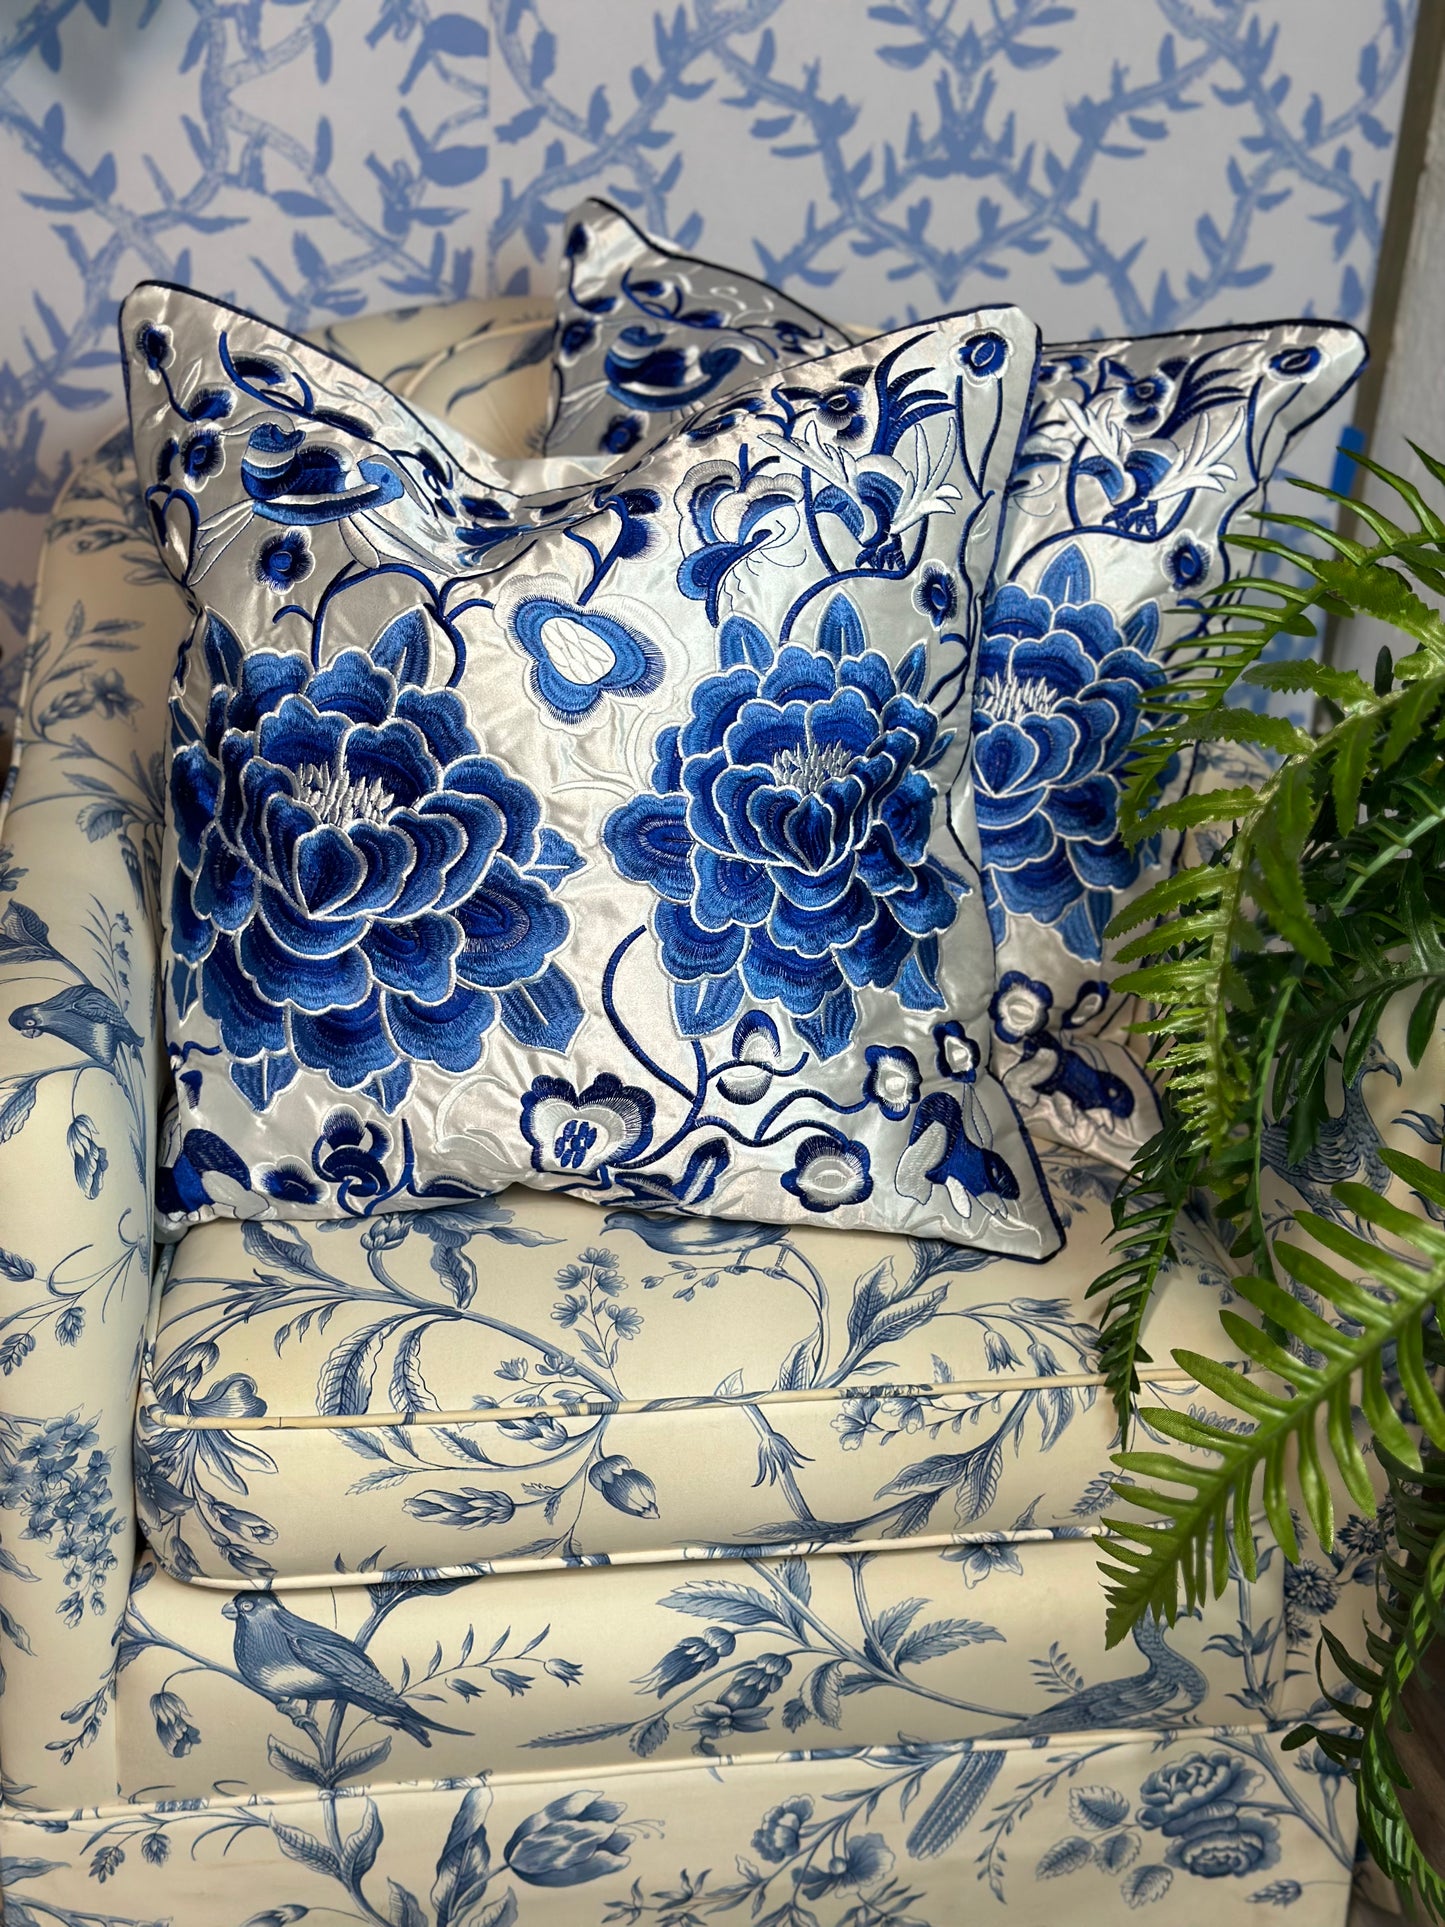 NEW - Blue & White, 20x20" Silk Peony Floral, Embroidered Pillow W/ Insert